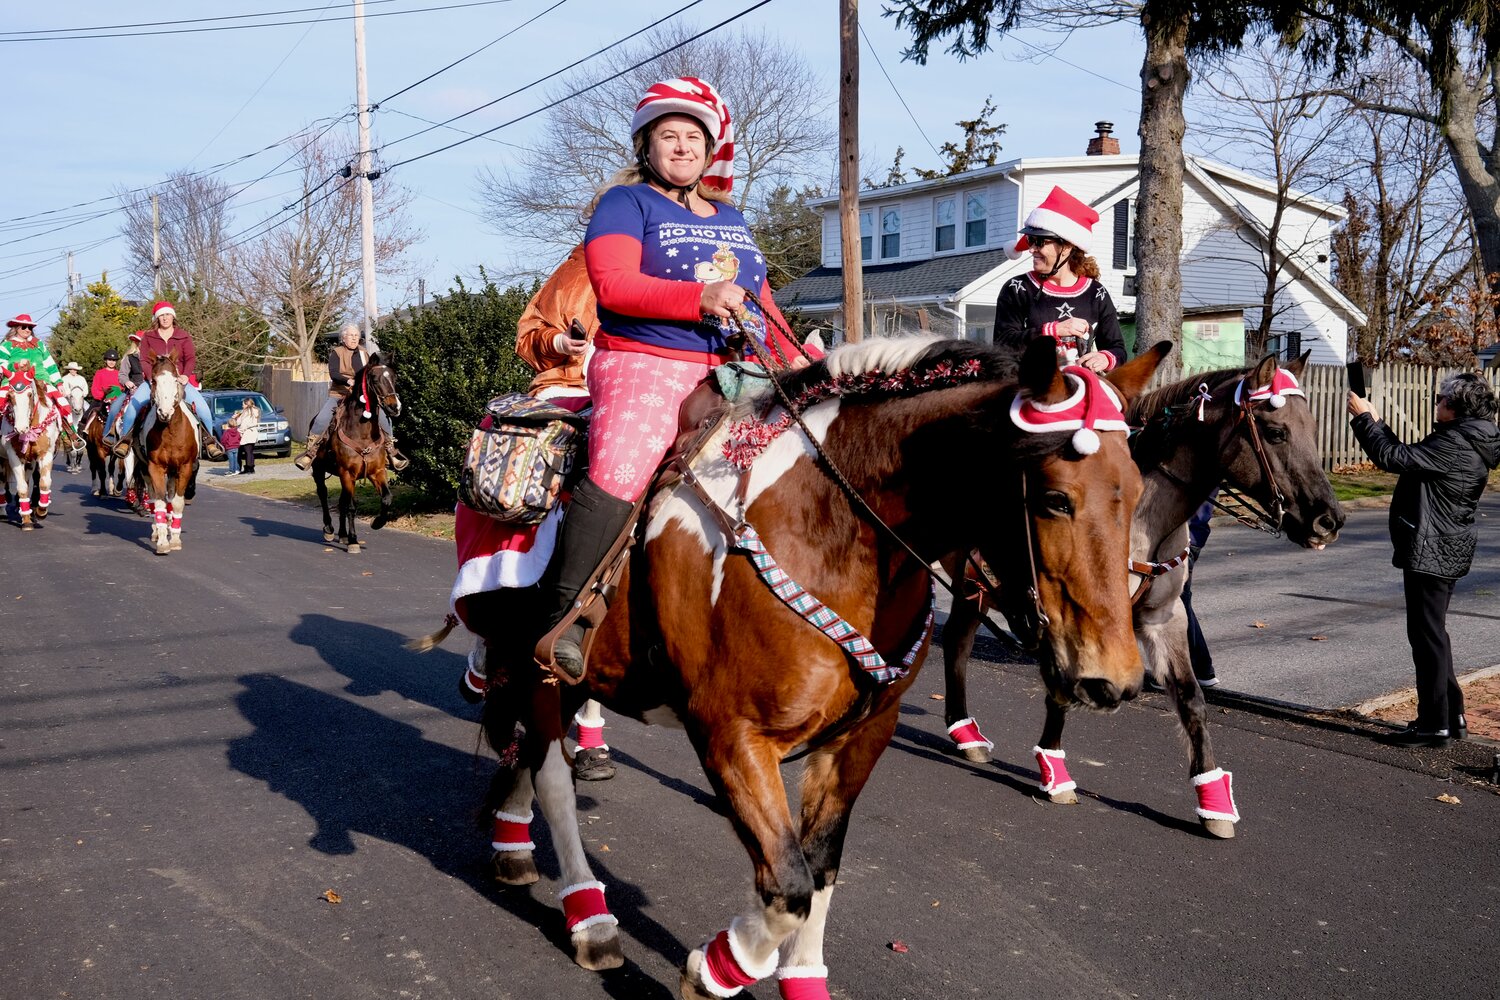 A festive-looking Jen Jackson (foreground) and Candy Ferreira ride their horses through the neighborhood.